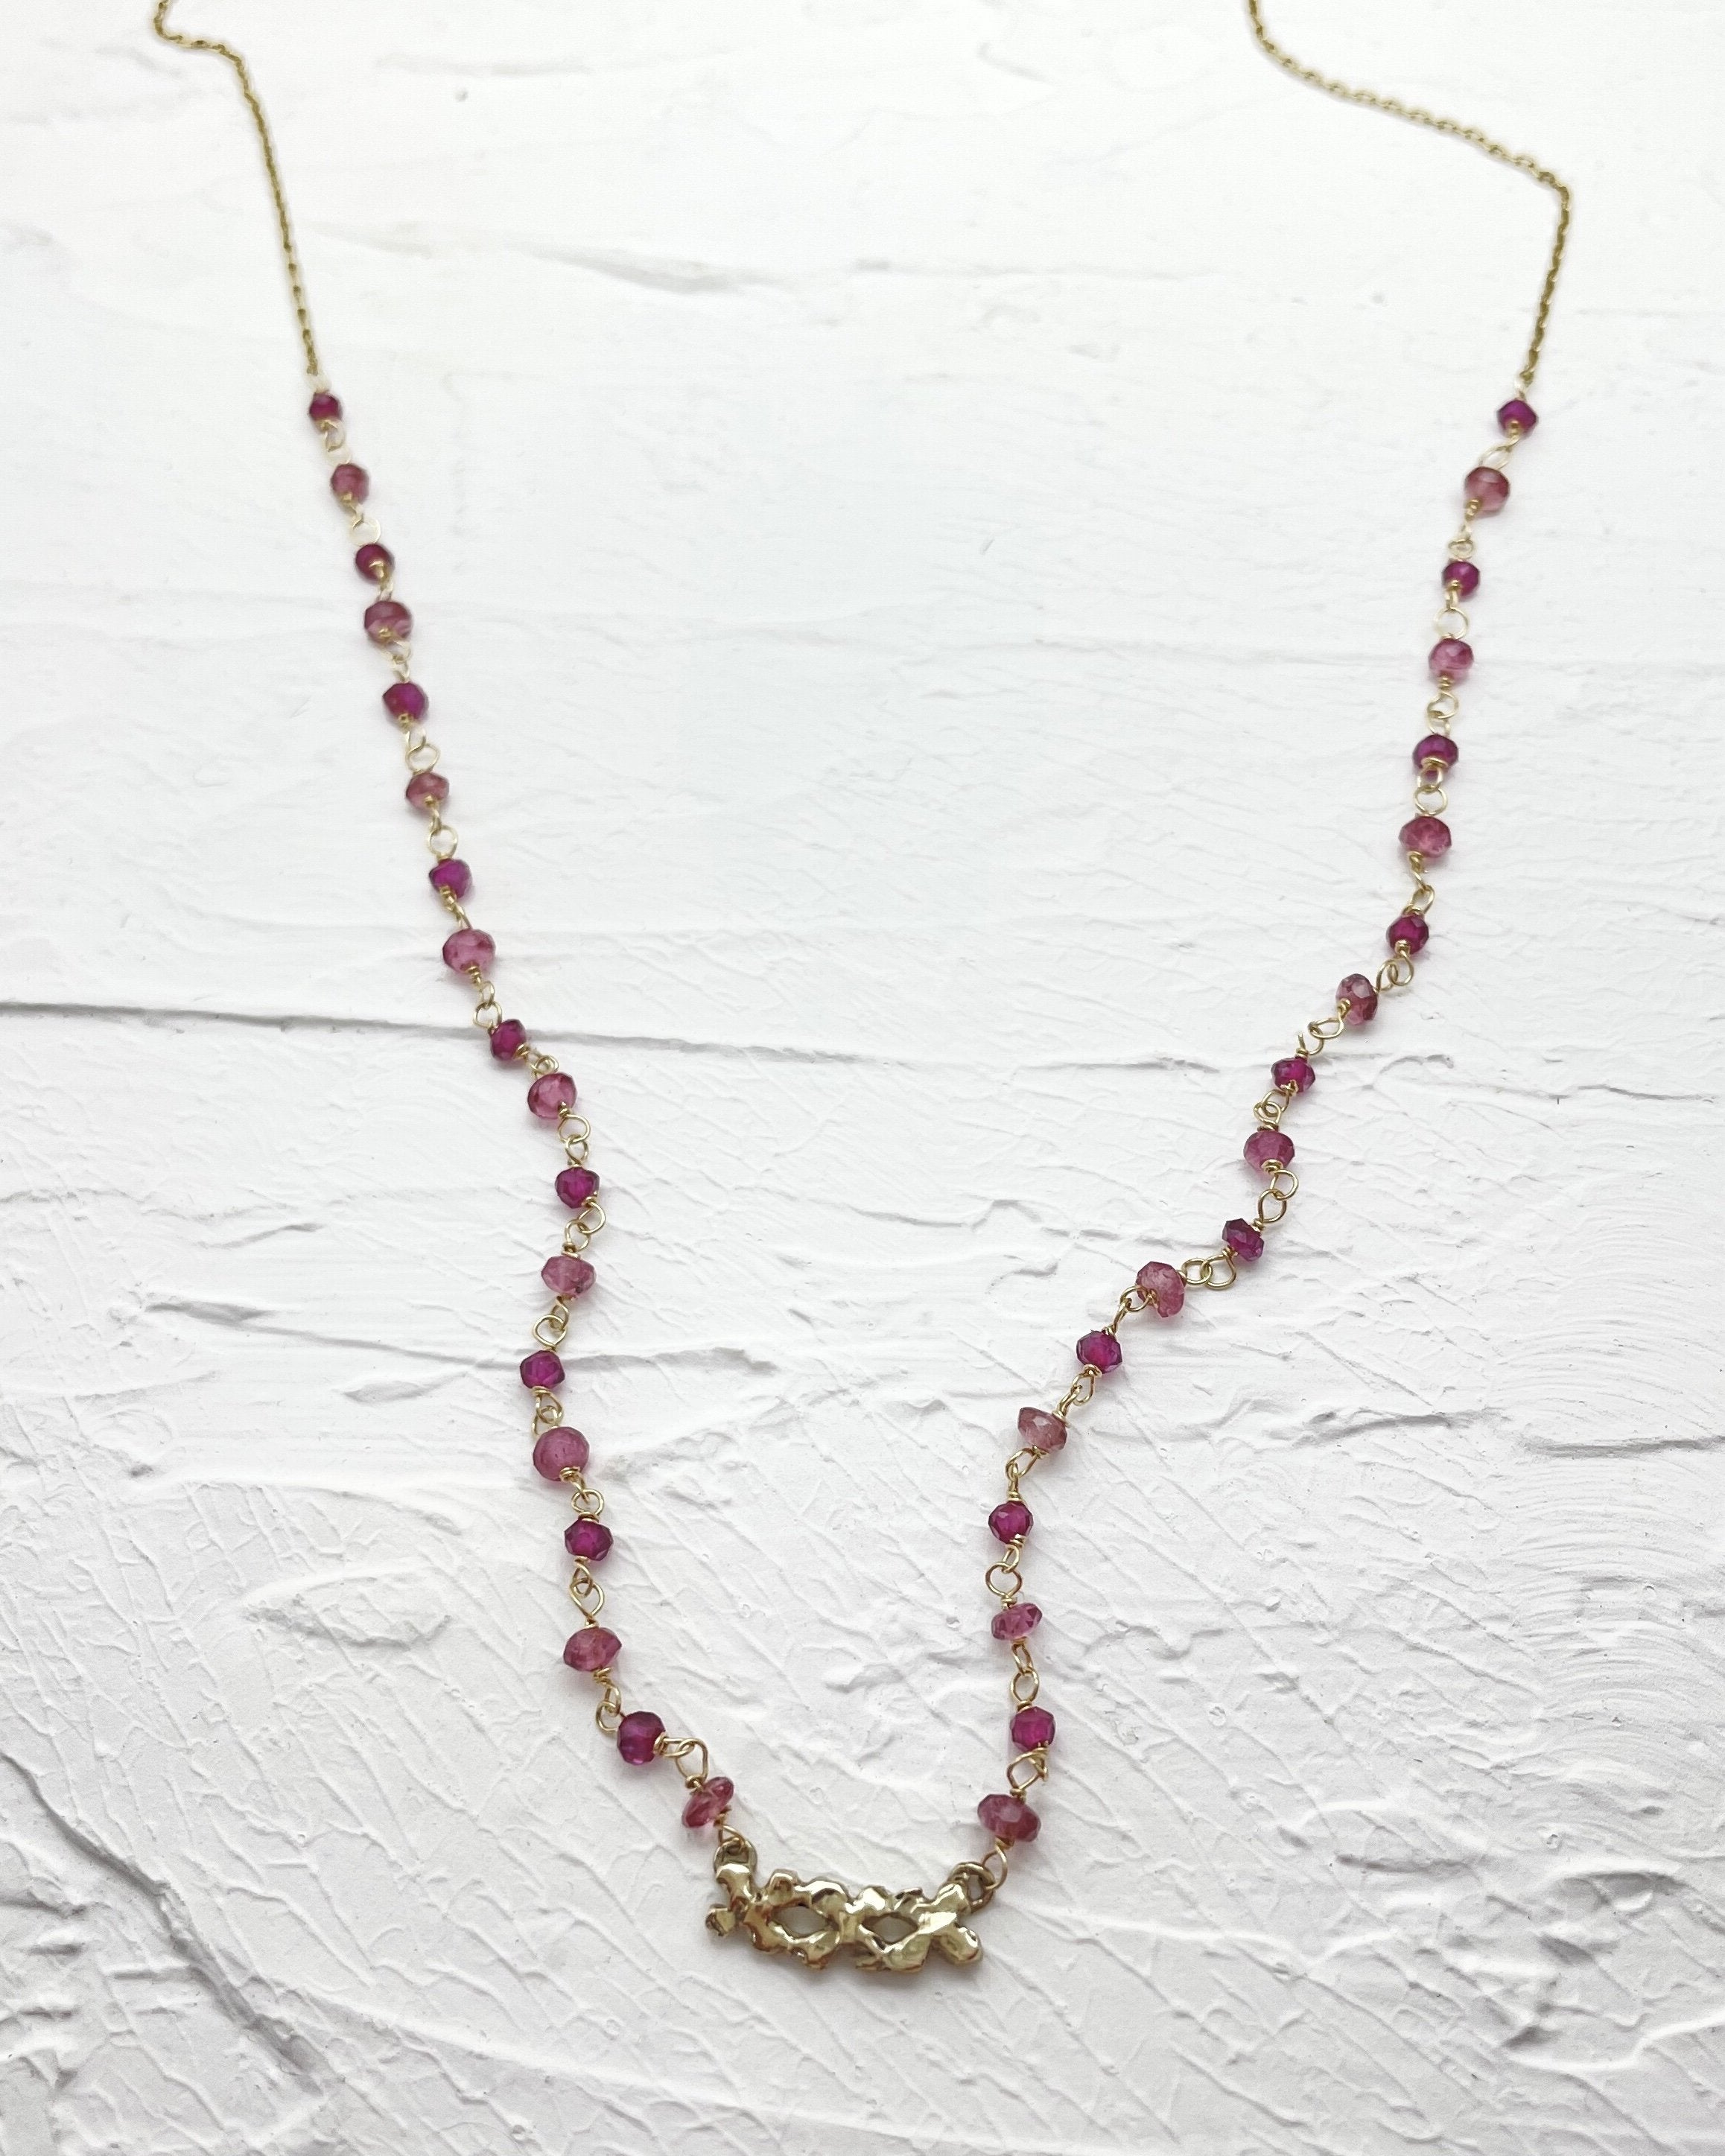 3 Tiny Flowers on Garnet and Pink Tourmalines Necklace (10k)